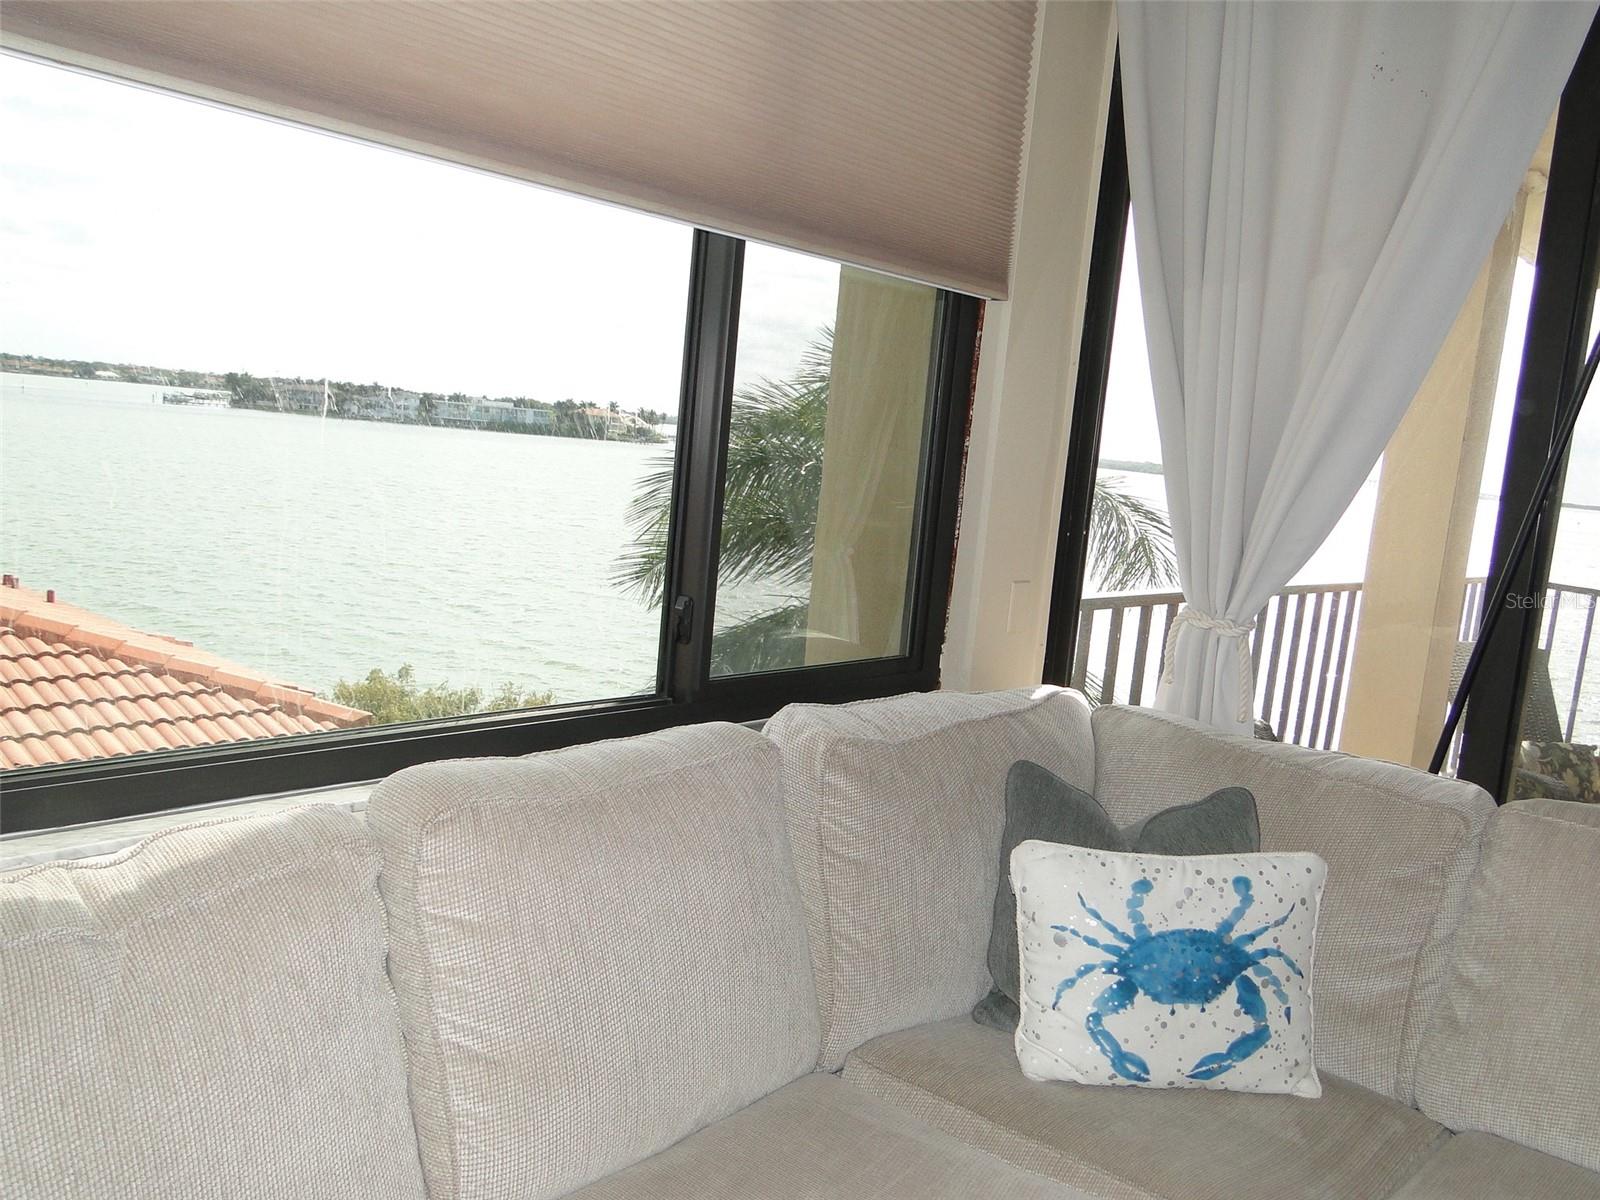 Every window welcomes you with a Majestic Water view!!